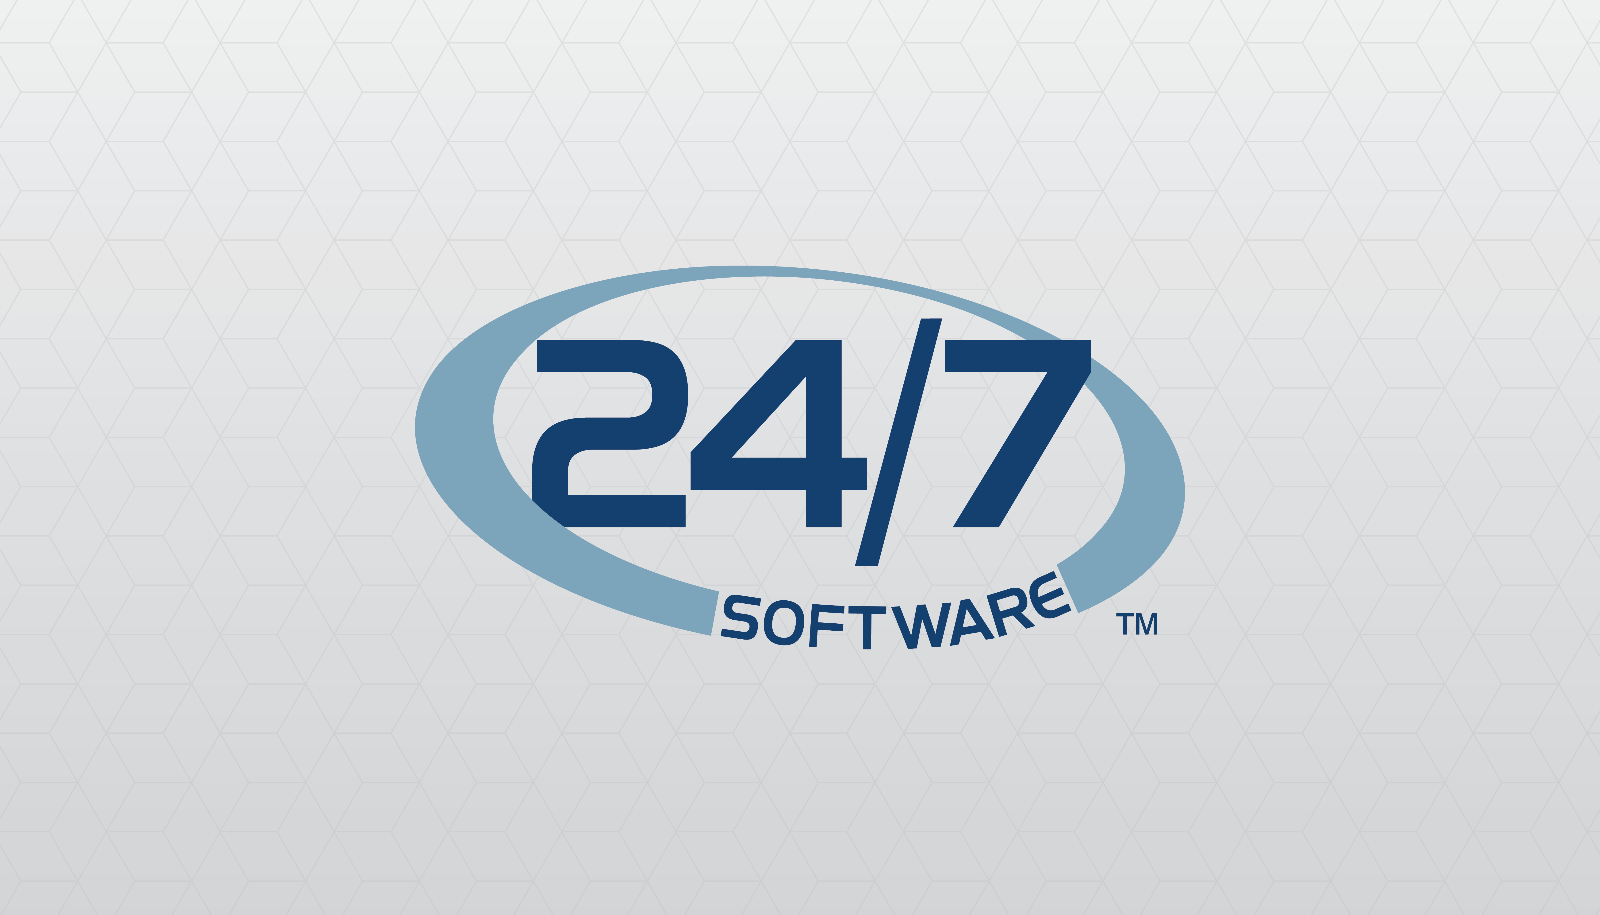 Facility Management Software | 24/7 Software